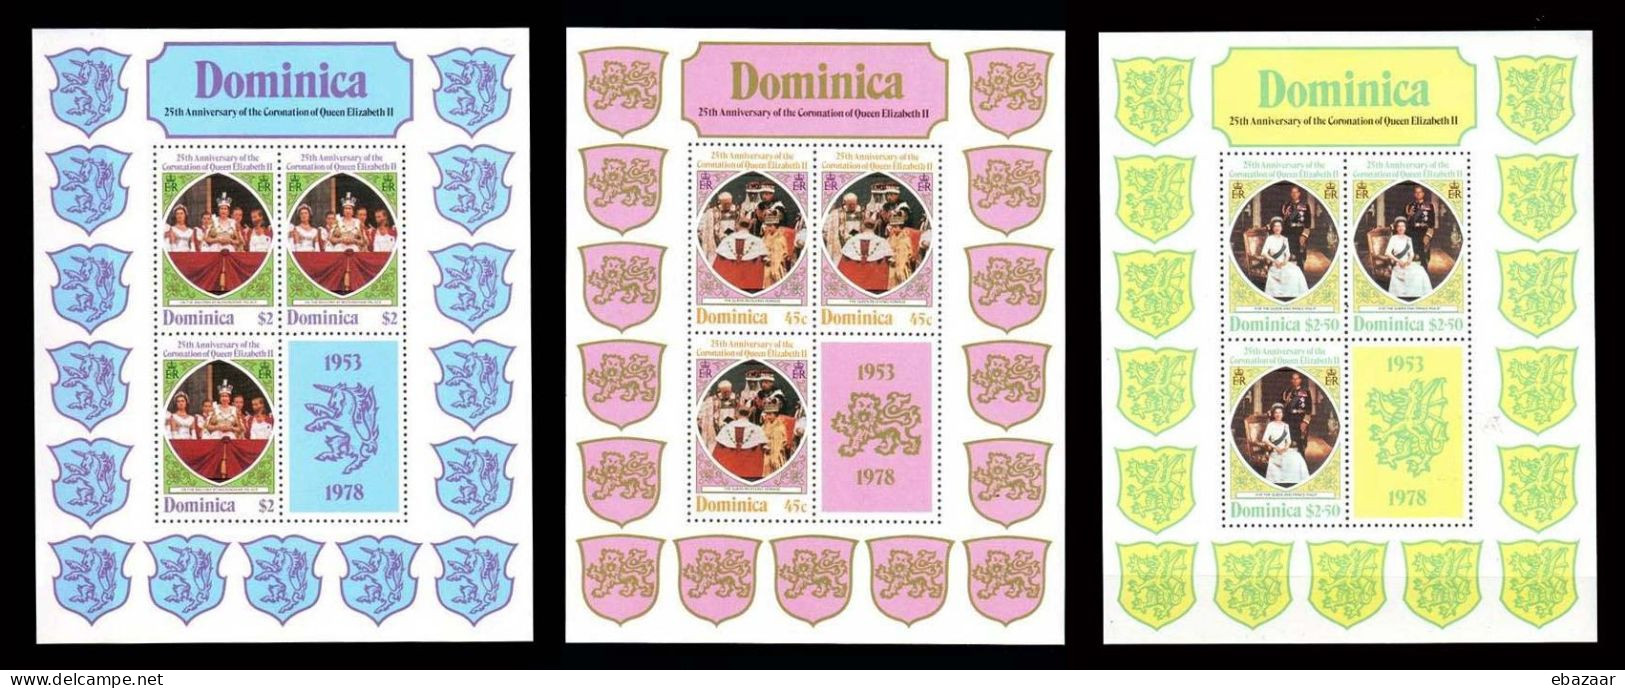 Dominica 1977 Royalty, Kings & Queens Of England, Queen Elizabeth II, Silver Jubilee Stamps Sheet MNH - Dominique (1978-...)